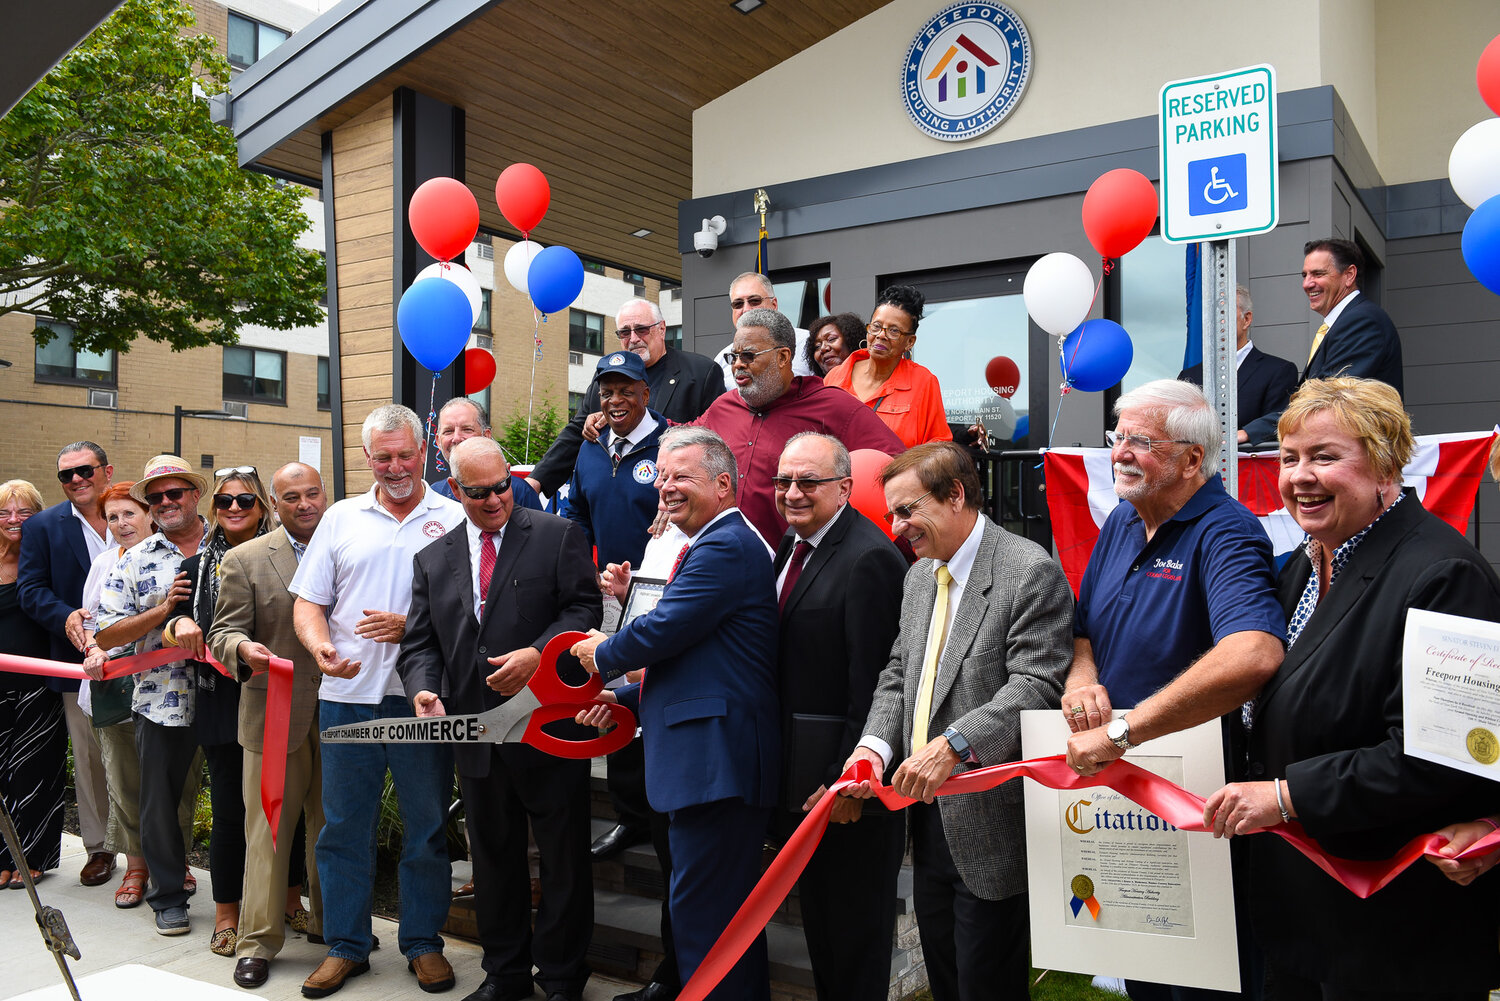 The Freeport Housing Authority has moved into its new North Main Street headquarters, celebrating with a ribbon-cutting ceremony on Sept. 13. It marked a significant step forward after a decade of operating in a temporary facility after Hurricane Sandy extensively damaged the agency’s old office.